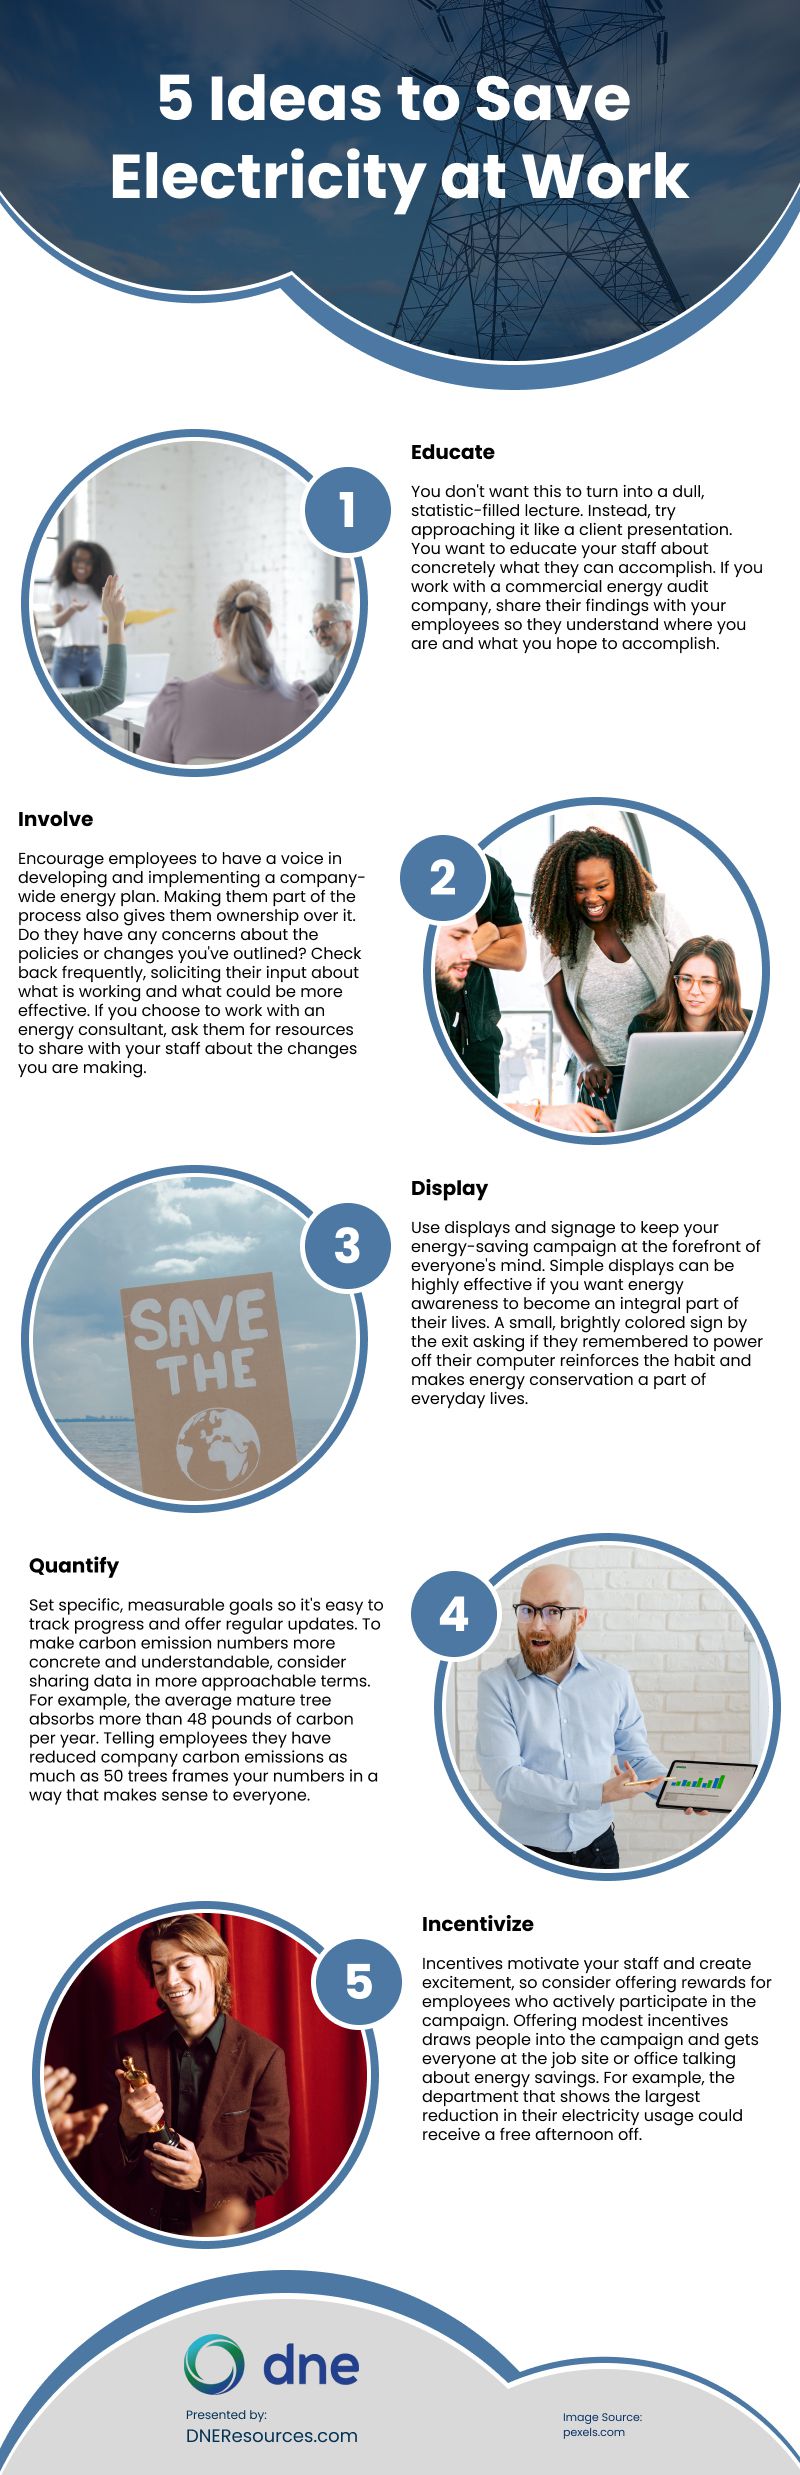 5 Ideas to Save Electricity at Work Infographic